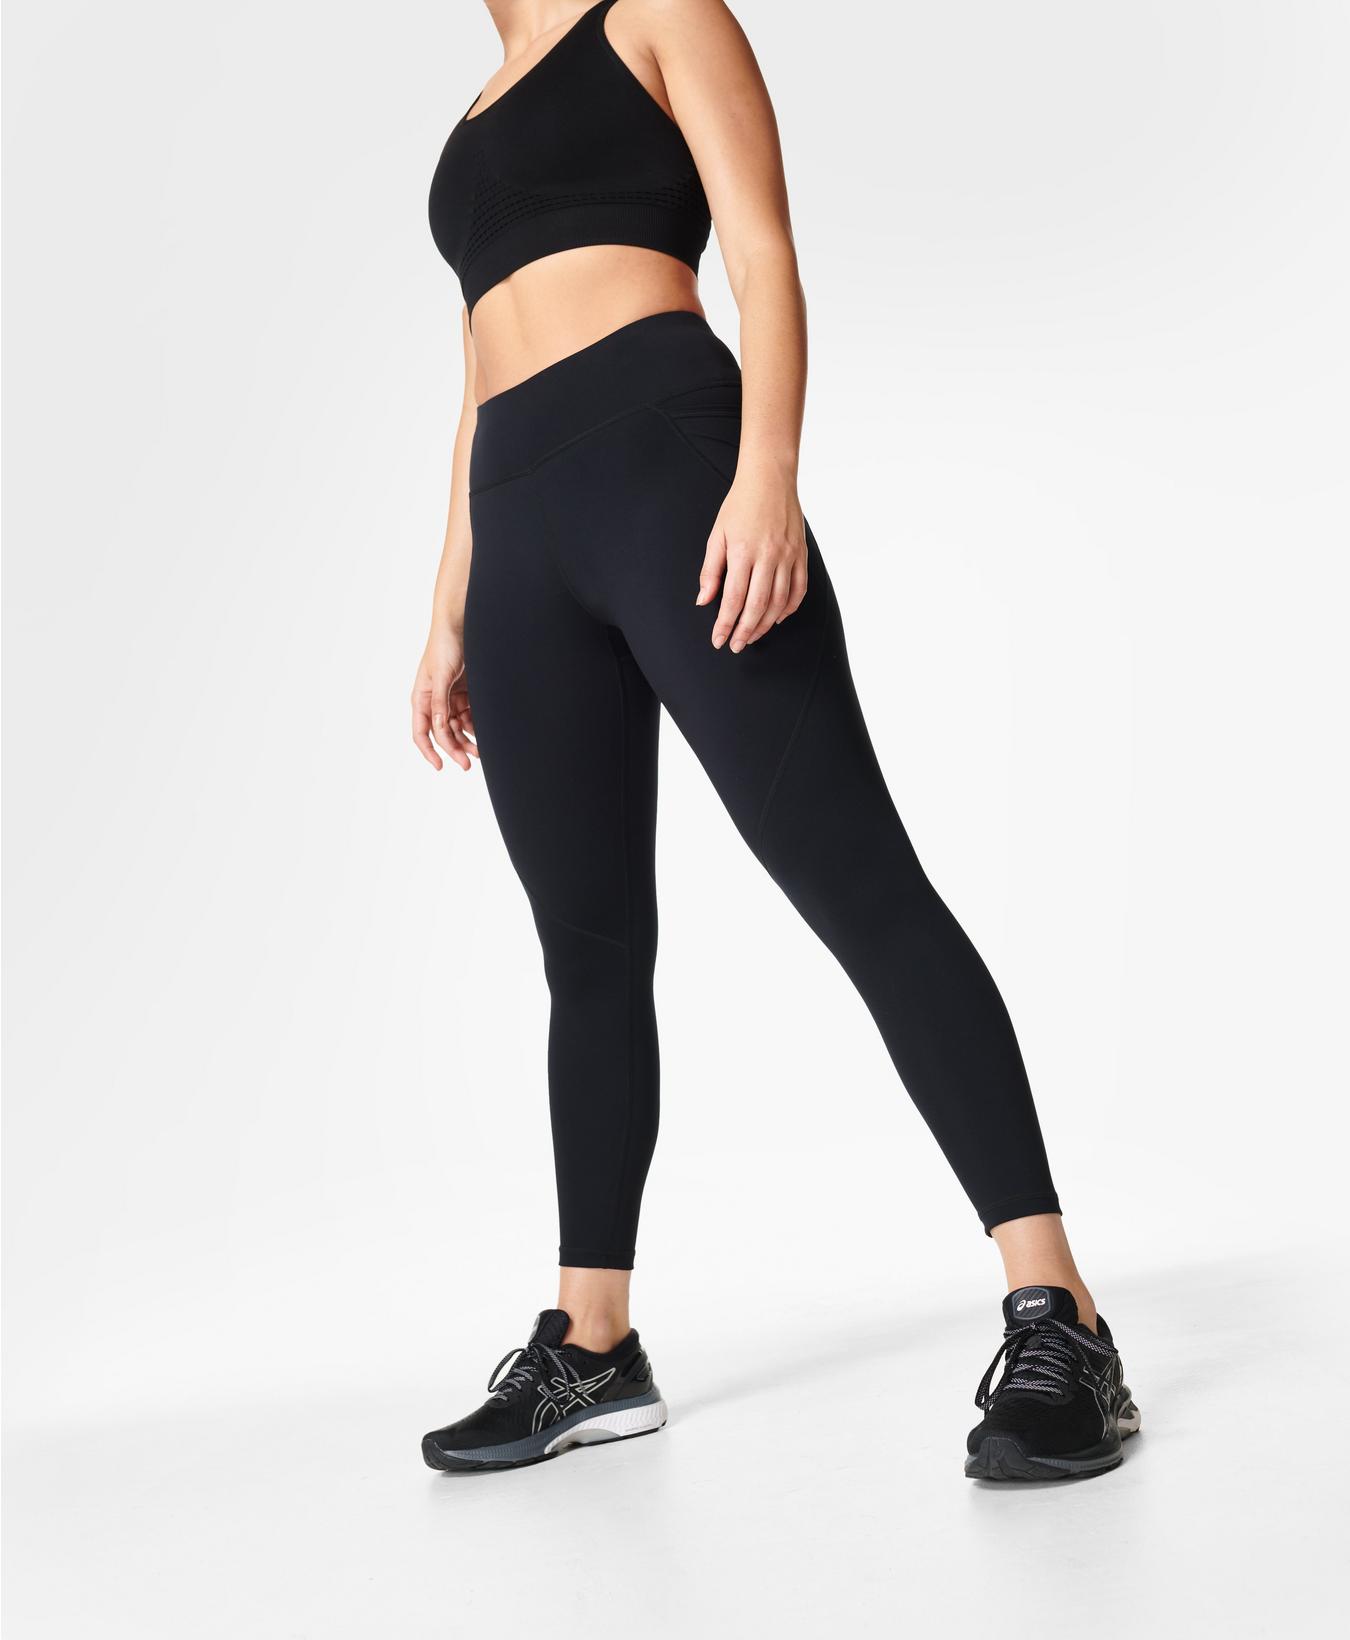 12 Best Compression Leggings for All Kinds of Workouts 2022 | Well+Good